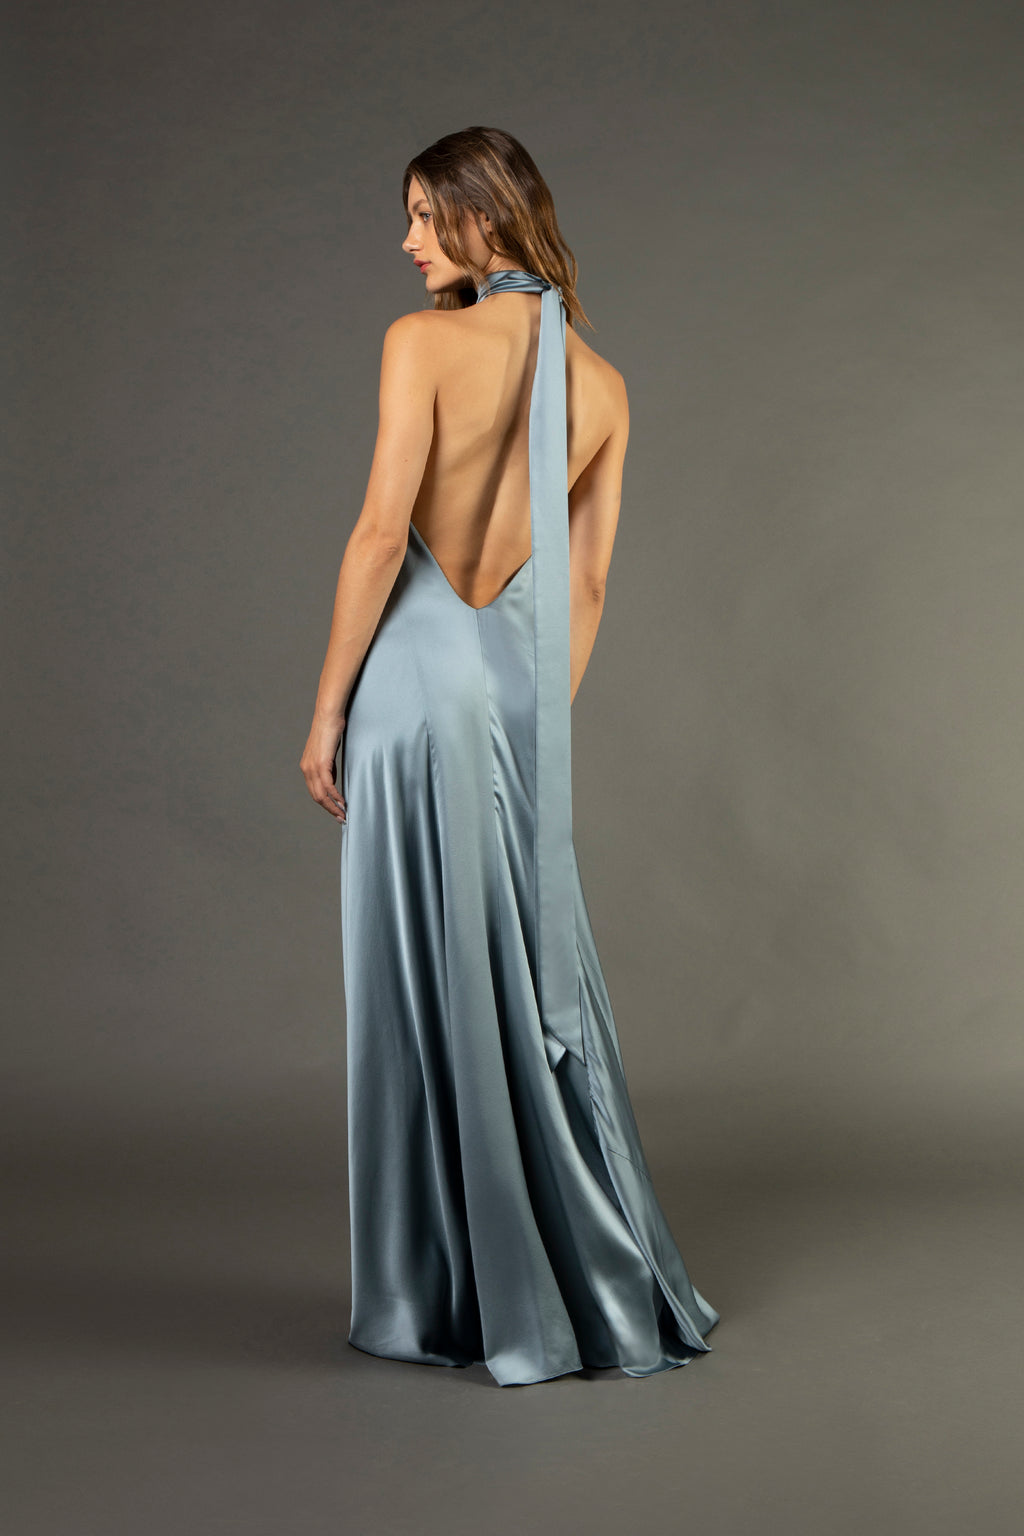 NWT Michelle Mason Halter Tie Neck Backless Gown - Ivory Size 4 venue ...